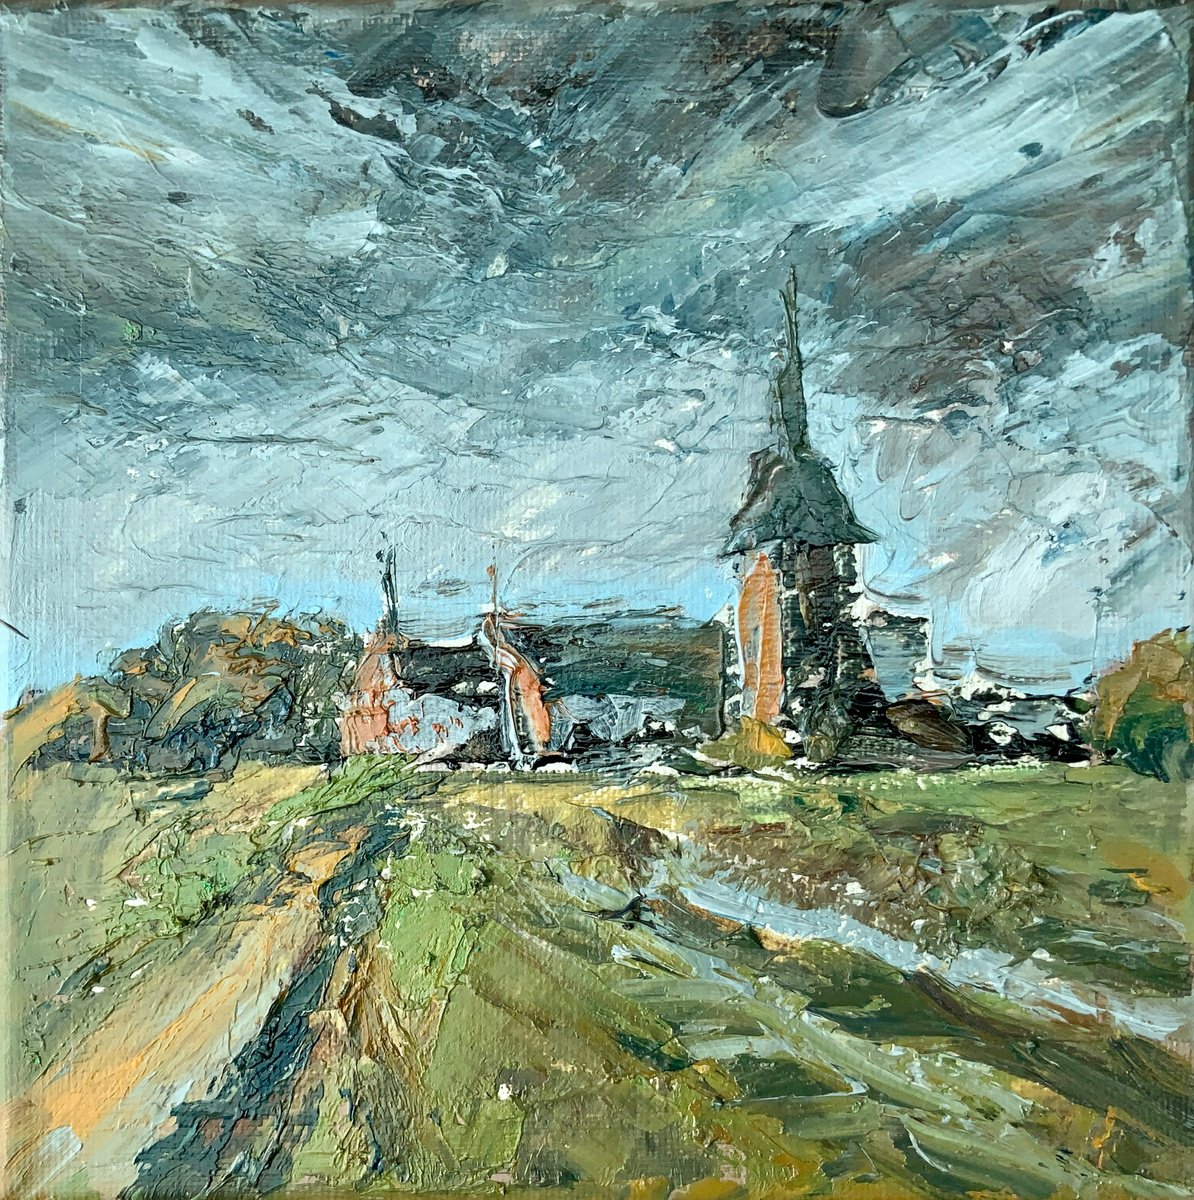 One little church - French landscape, stormy clouds by Alexandra Jagoda (Ovcharenko)